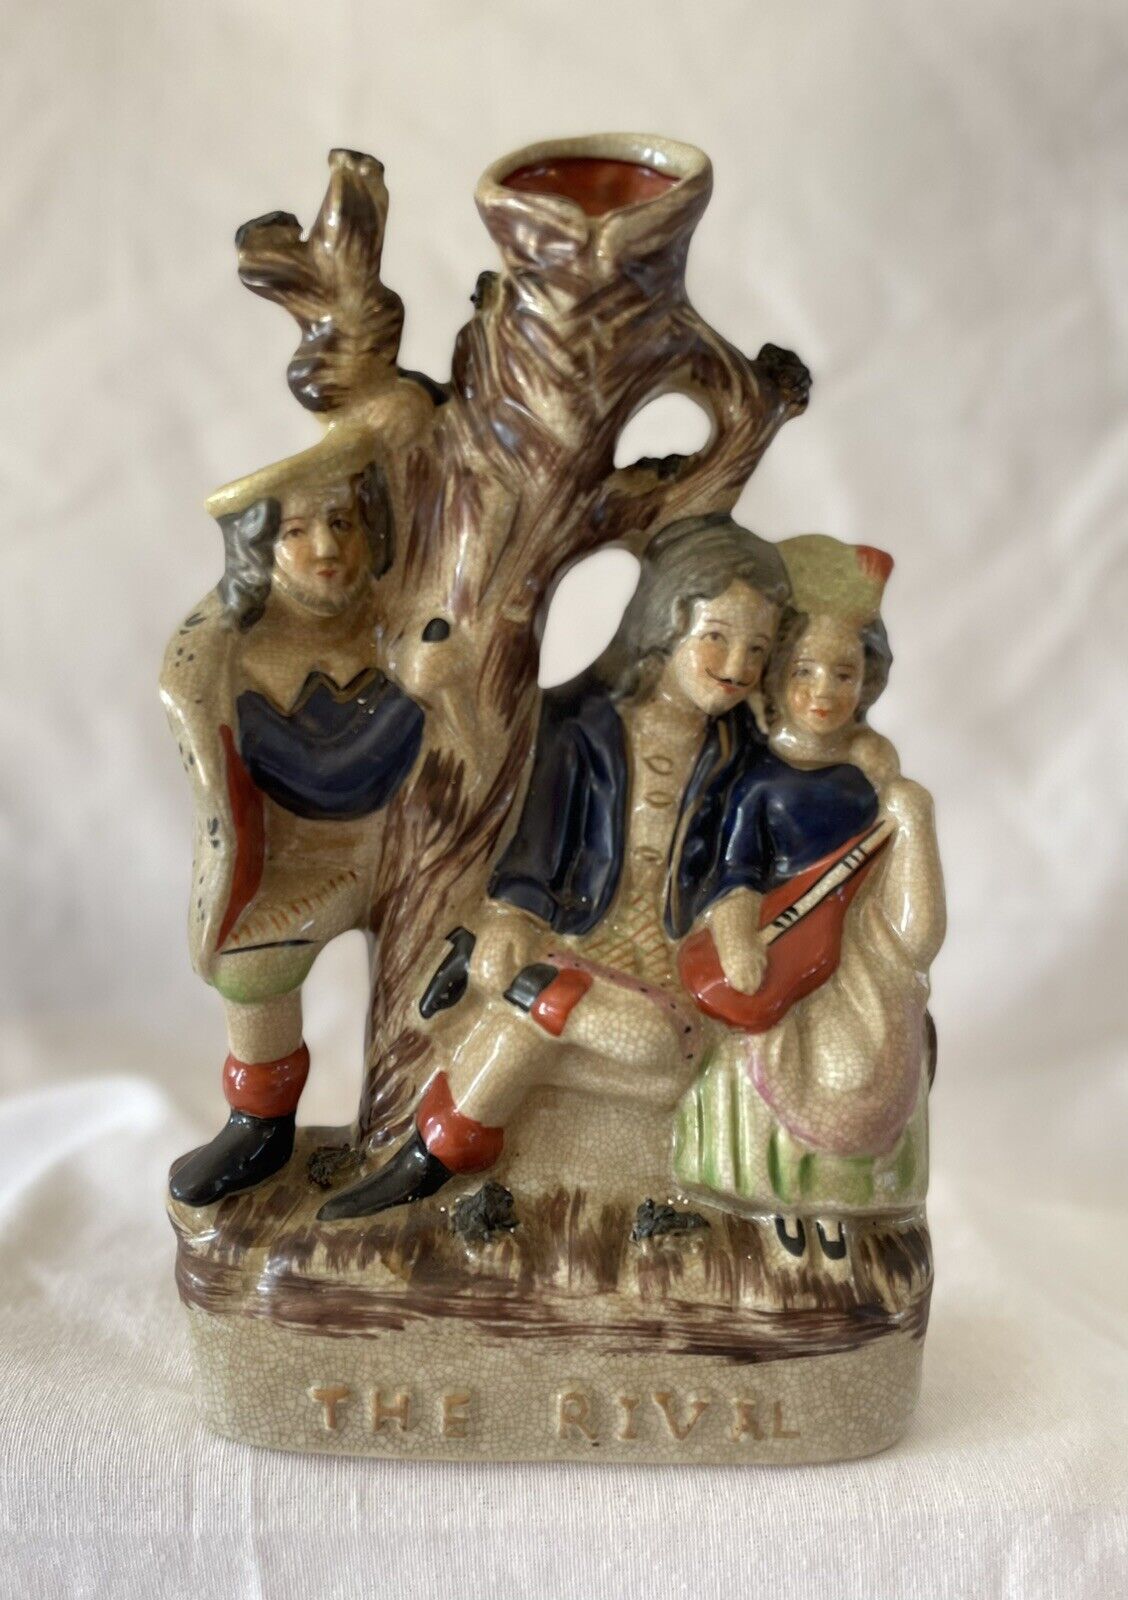 Staffordshire 19th Century Theatrical Figural Spill Vase Titled “The Rival”